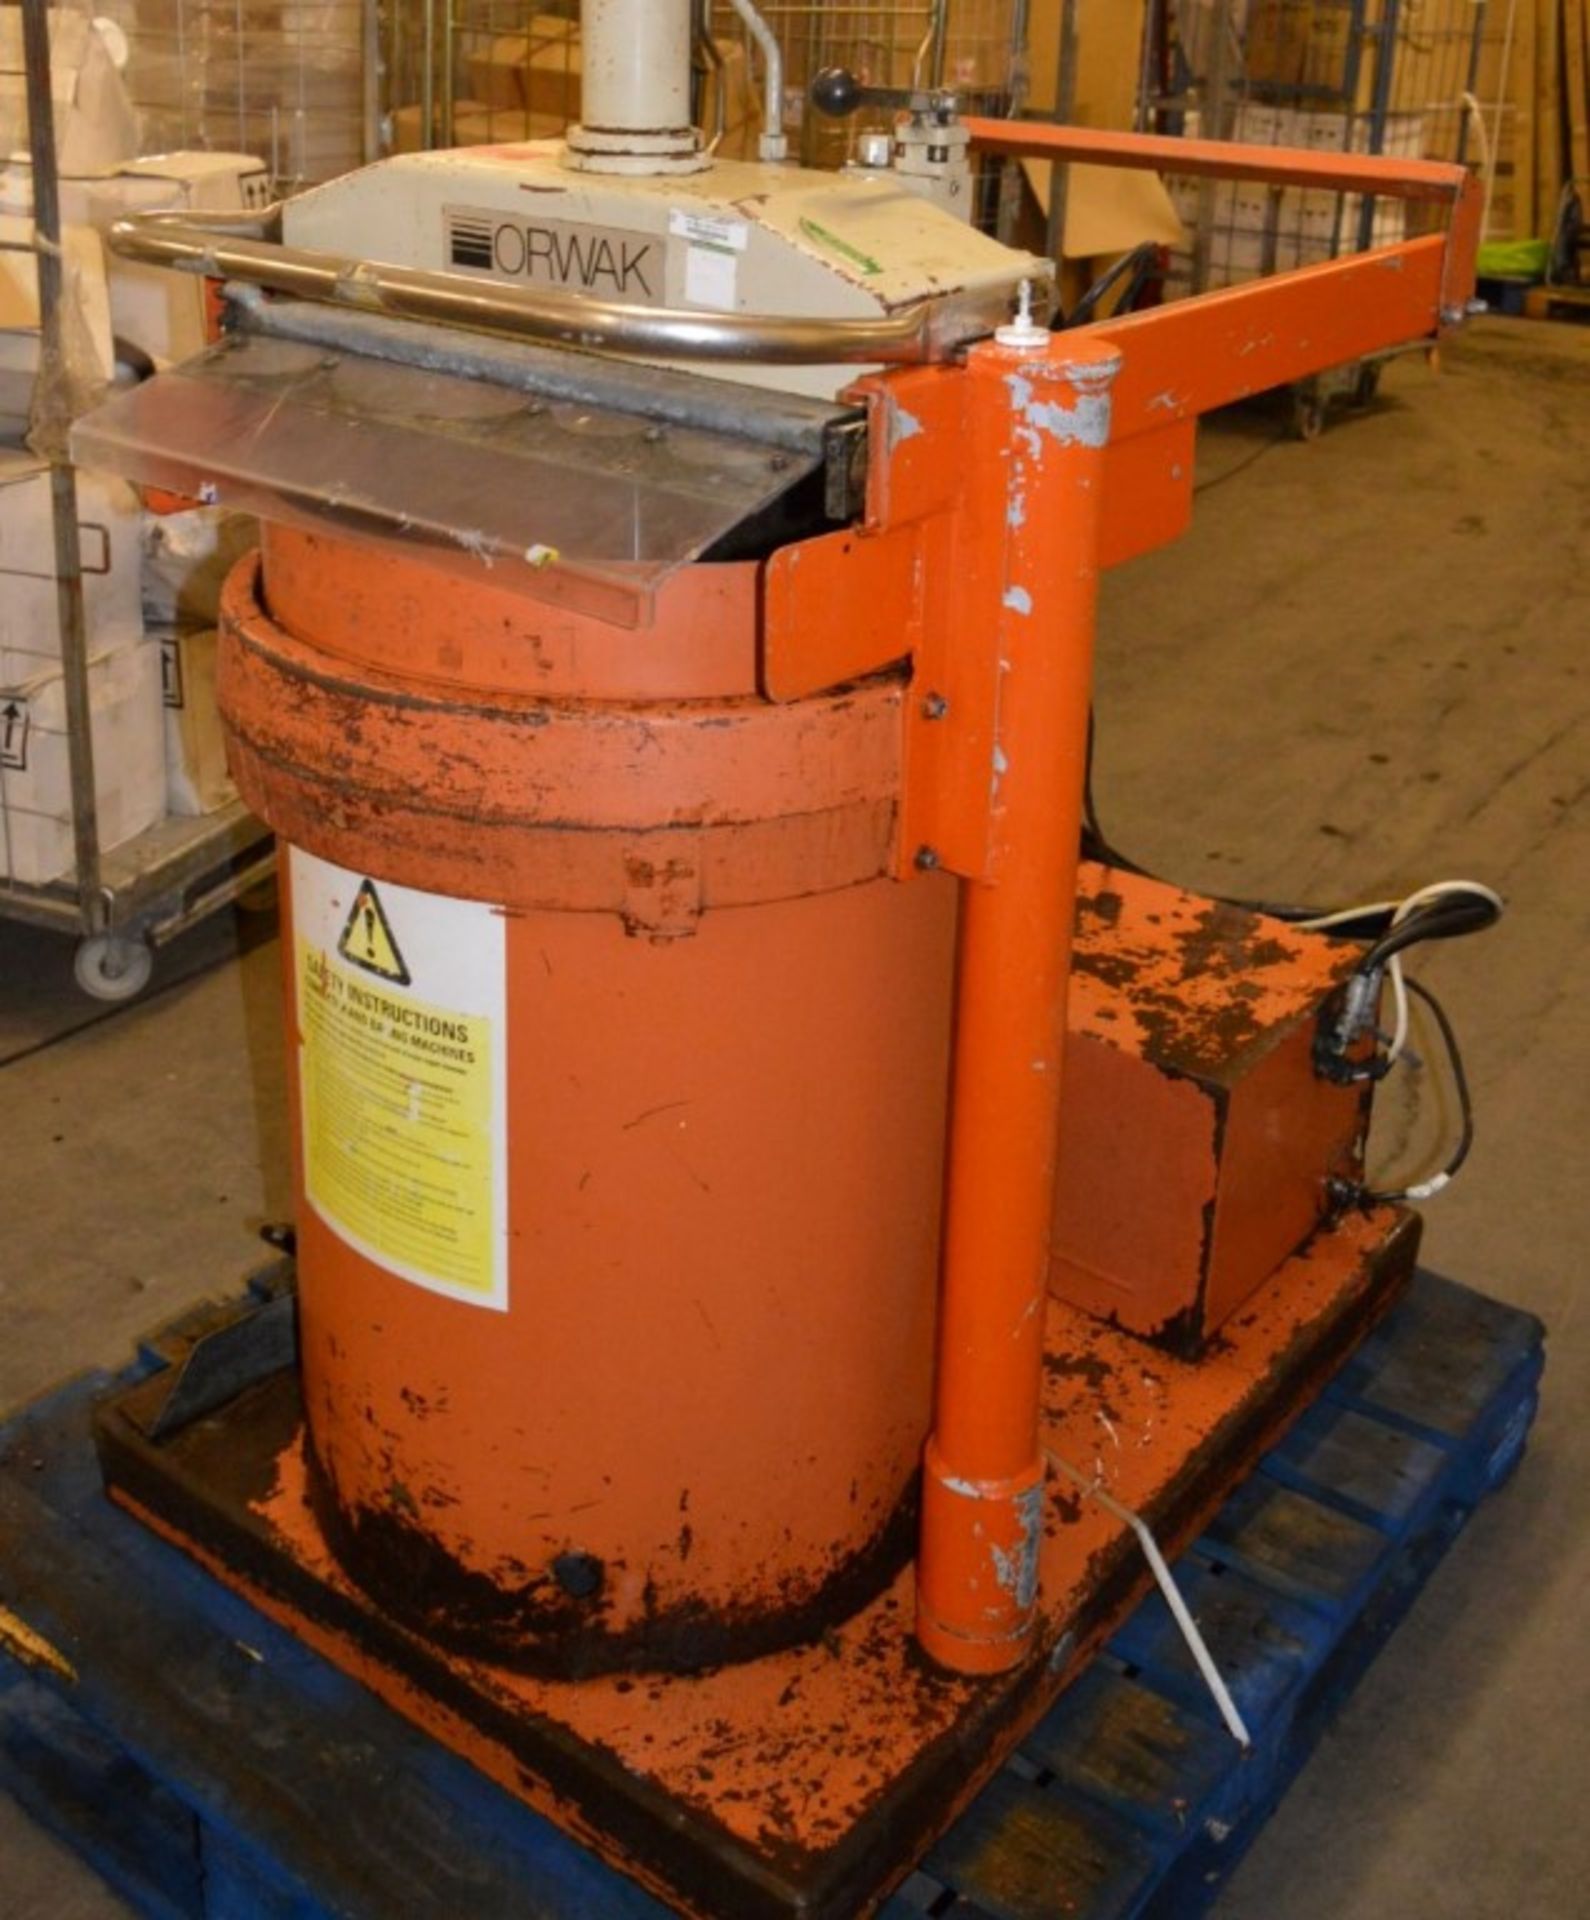 1 x Orwak 5030 Waste Compactor Bailer - Used For Compacting Recyclable or Non-Recyclable Waste - - Image 2 of 4